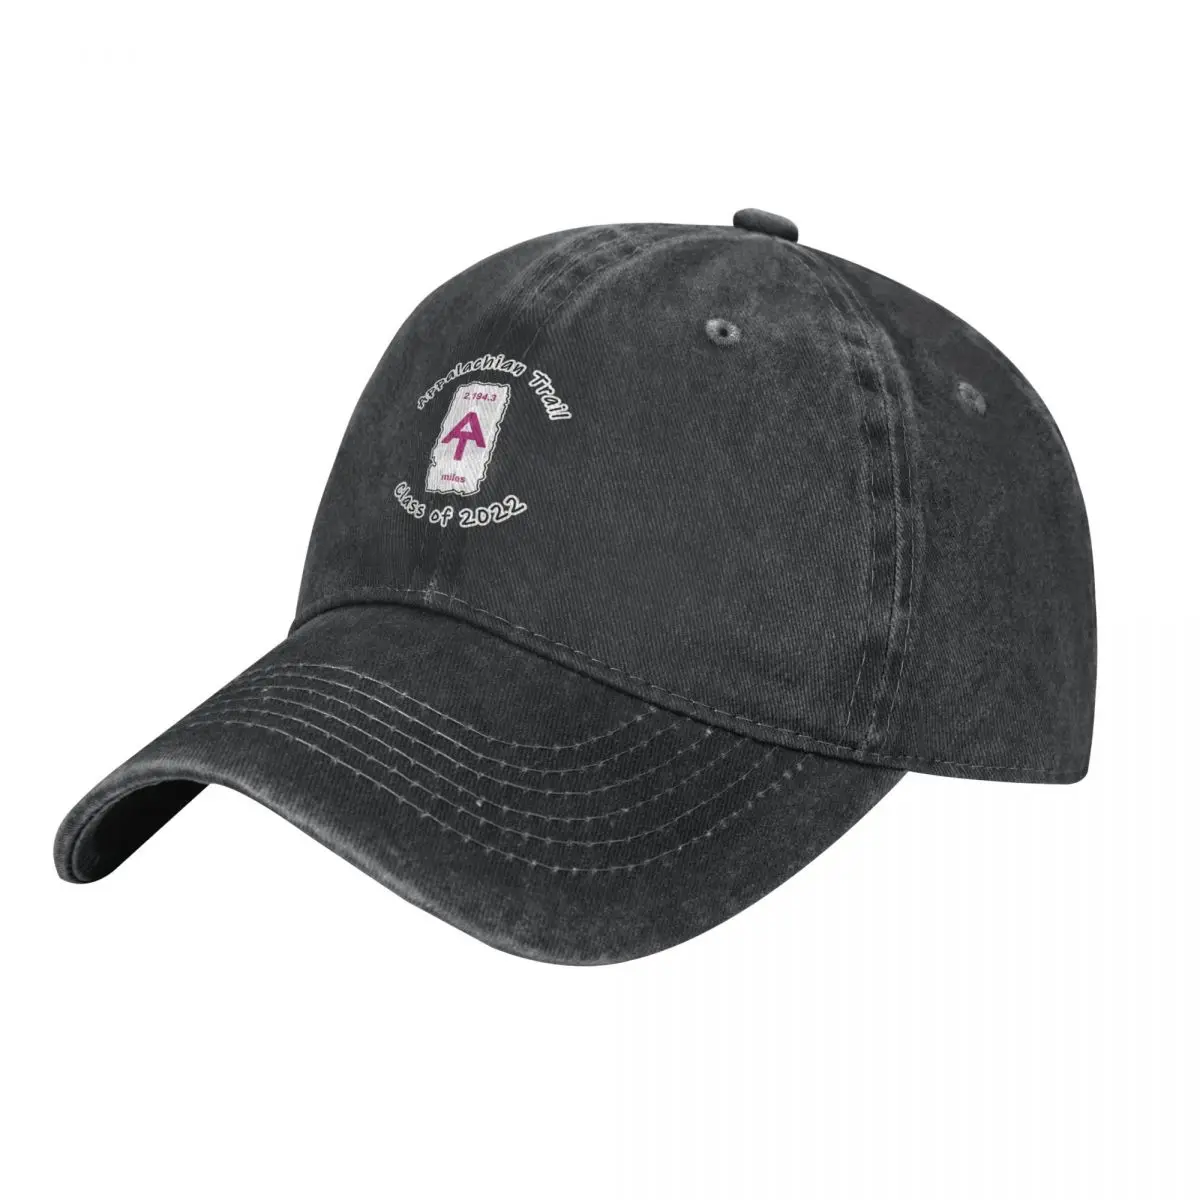 

Appalachian Trail Class of 2022 mileage and AT logo Cowboy Hat Gentleman Hat hard hat Caps For Men Women's